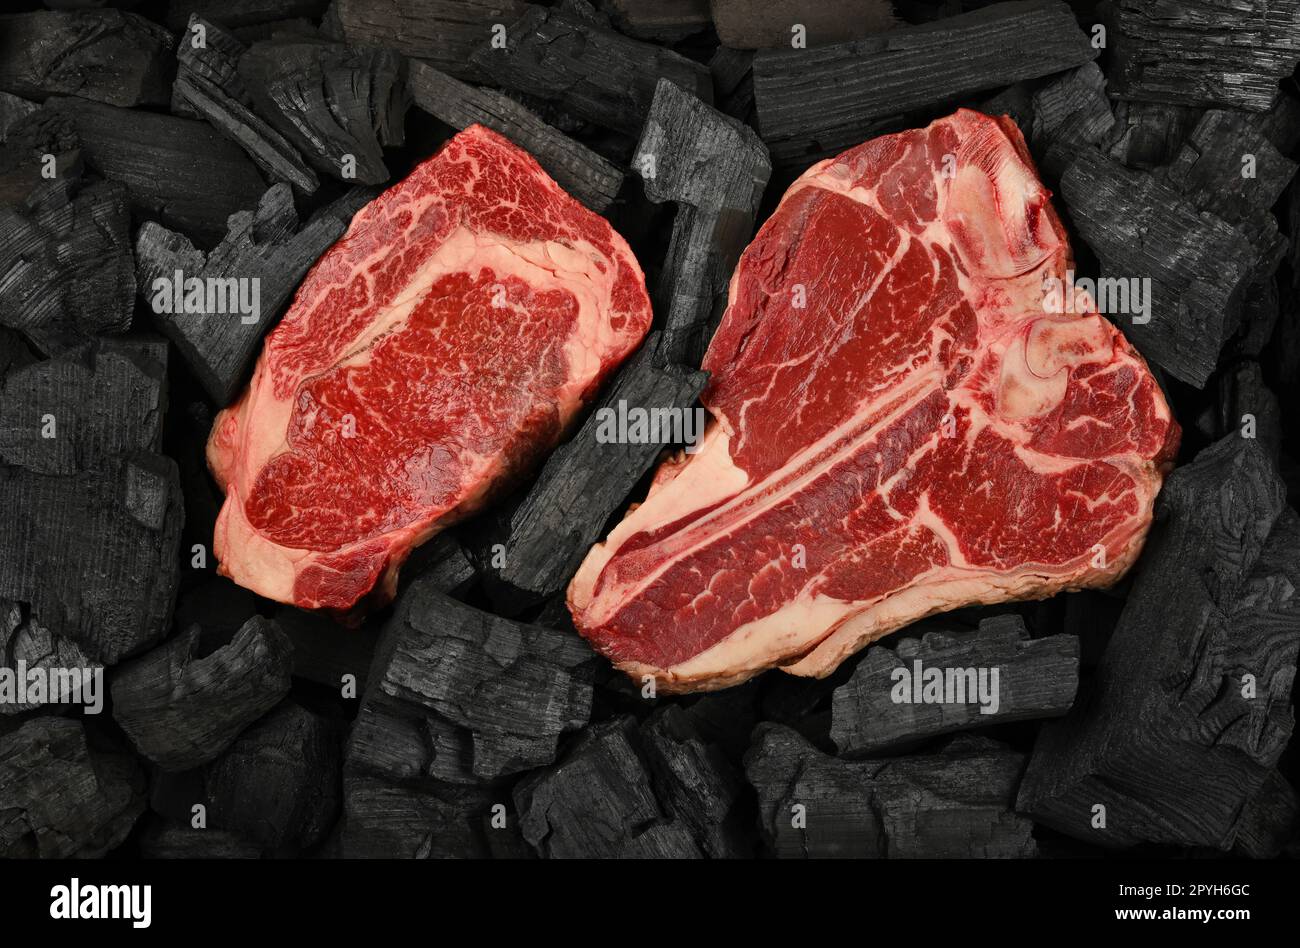 Cooking raw beef steaks on charcoal Stock Photo